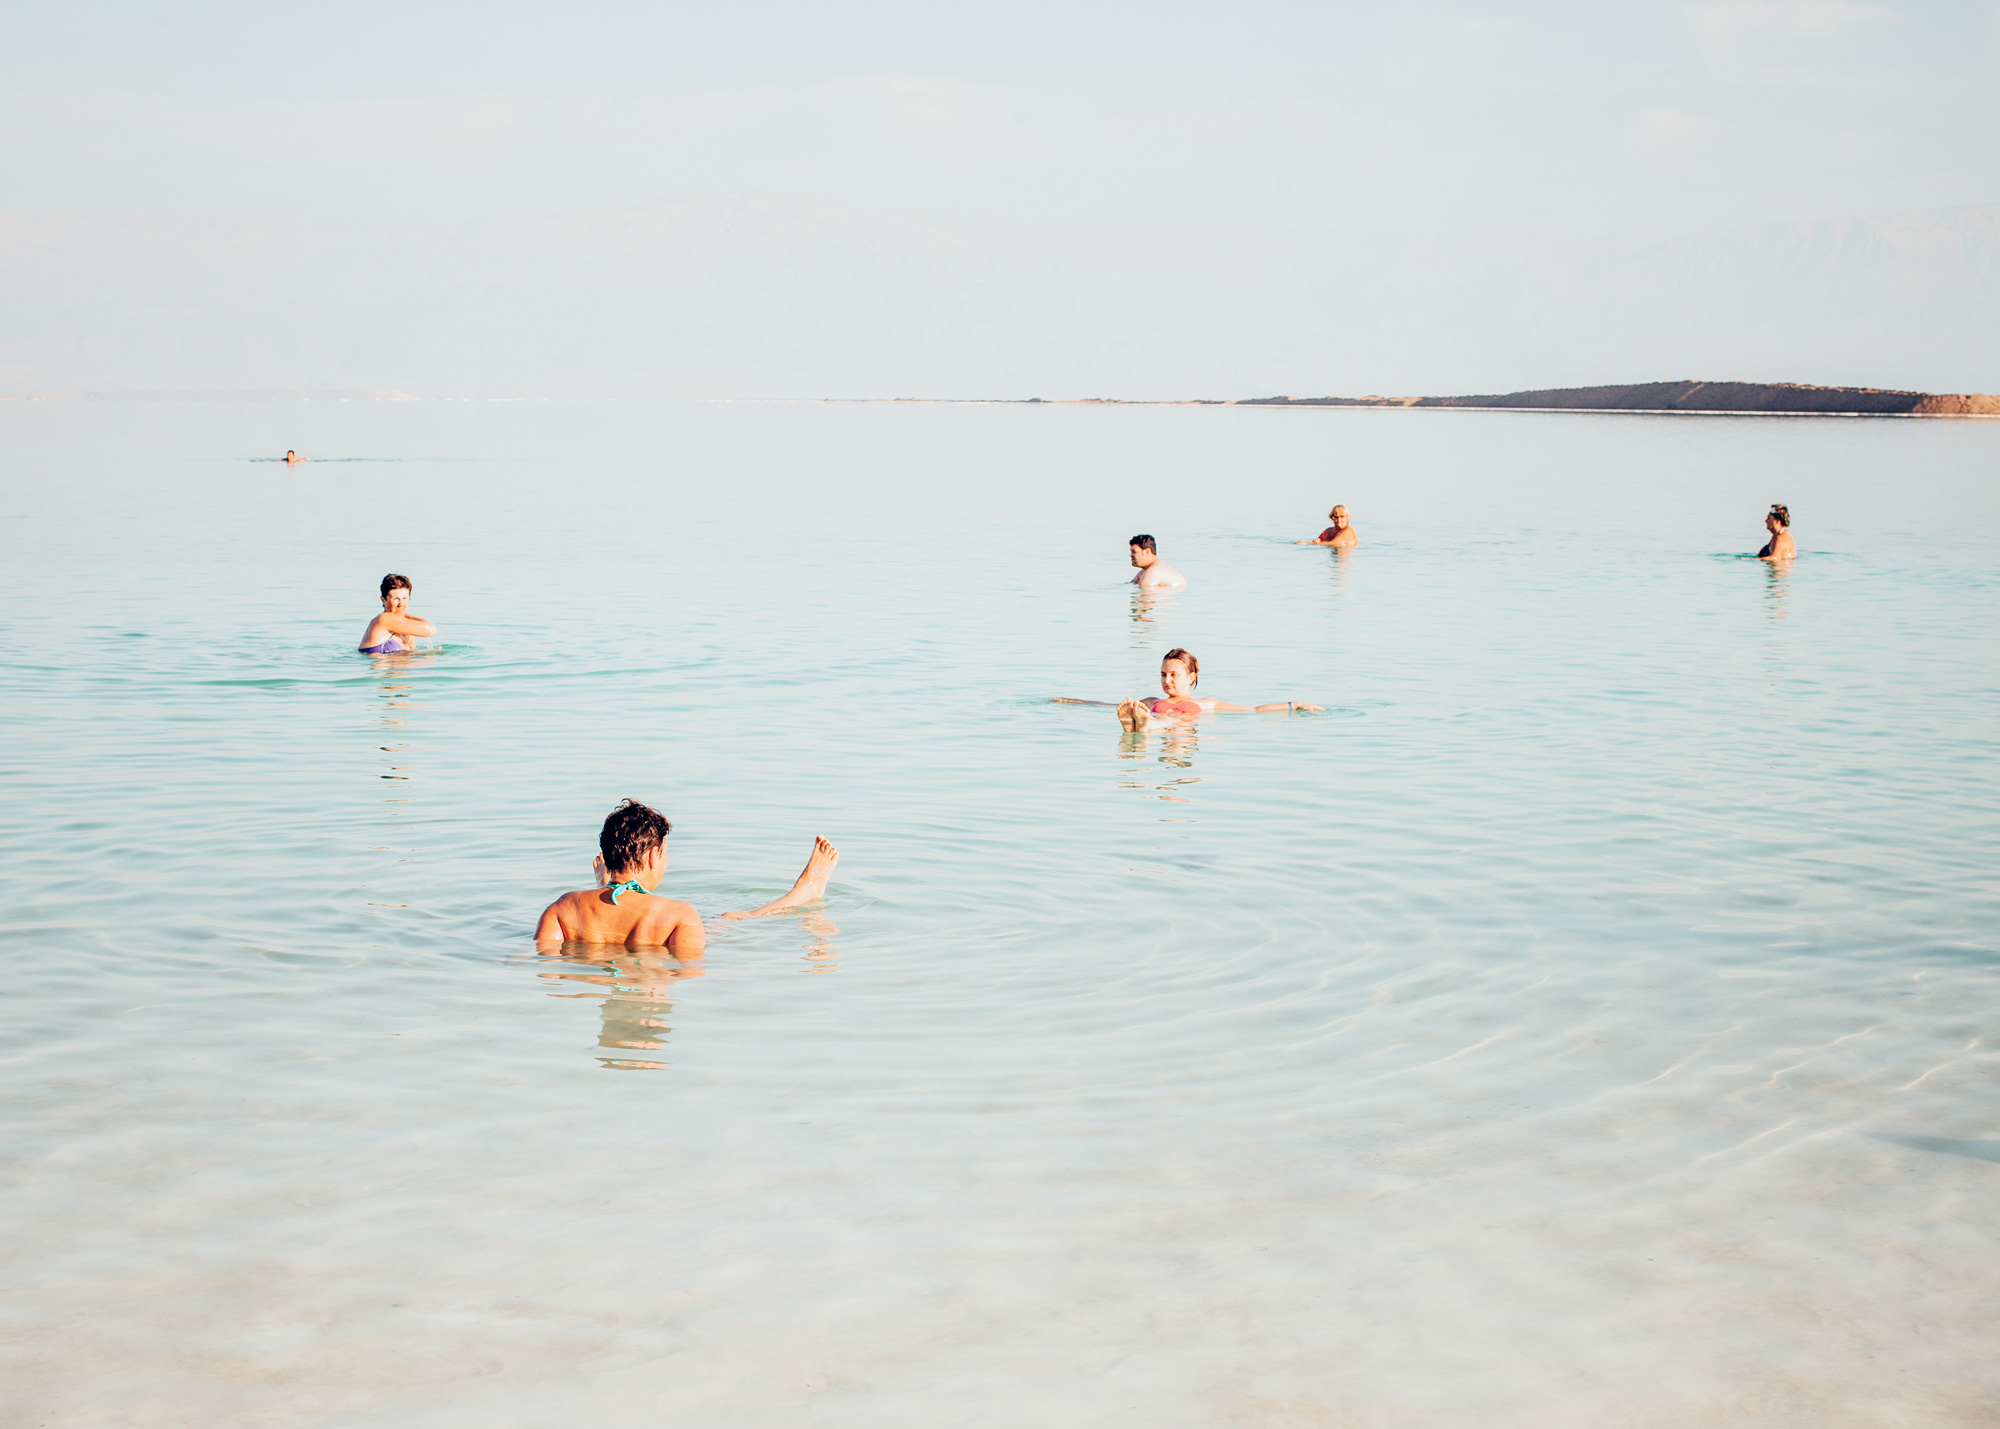 The_Dead_Sea   Israel   Travel_photography  Travel_photographer  Amazing_travel_photography  Tel_Aviv  Sophia_Spring